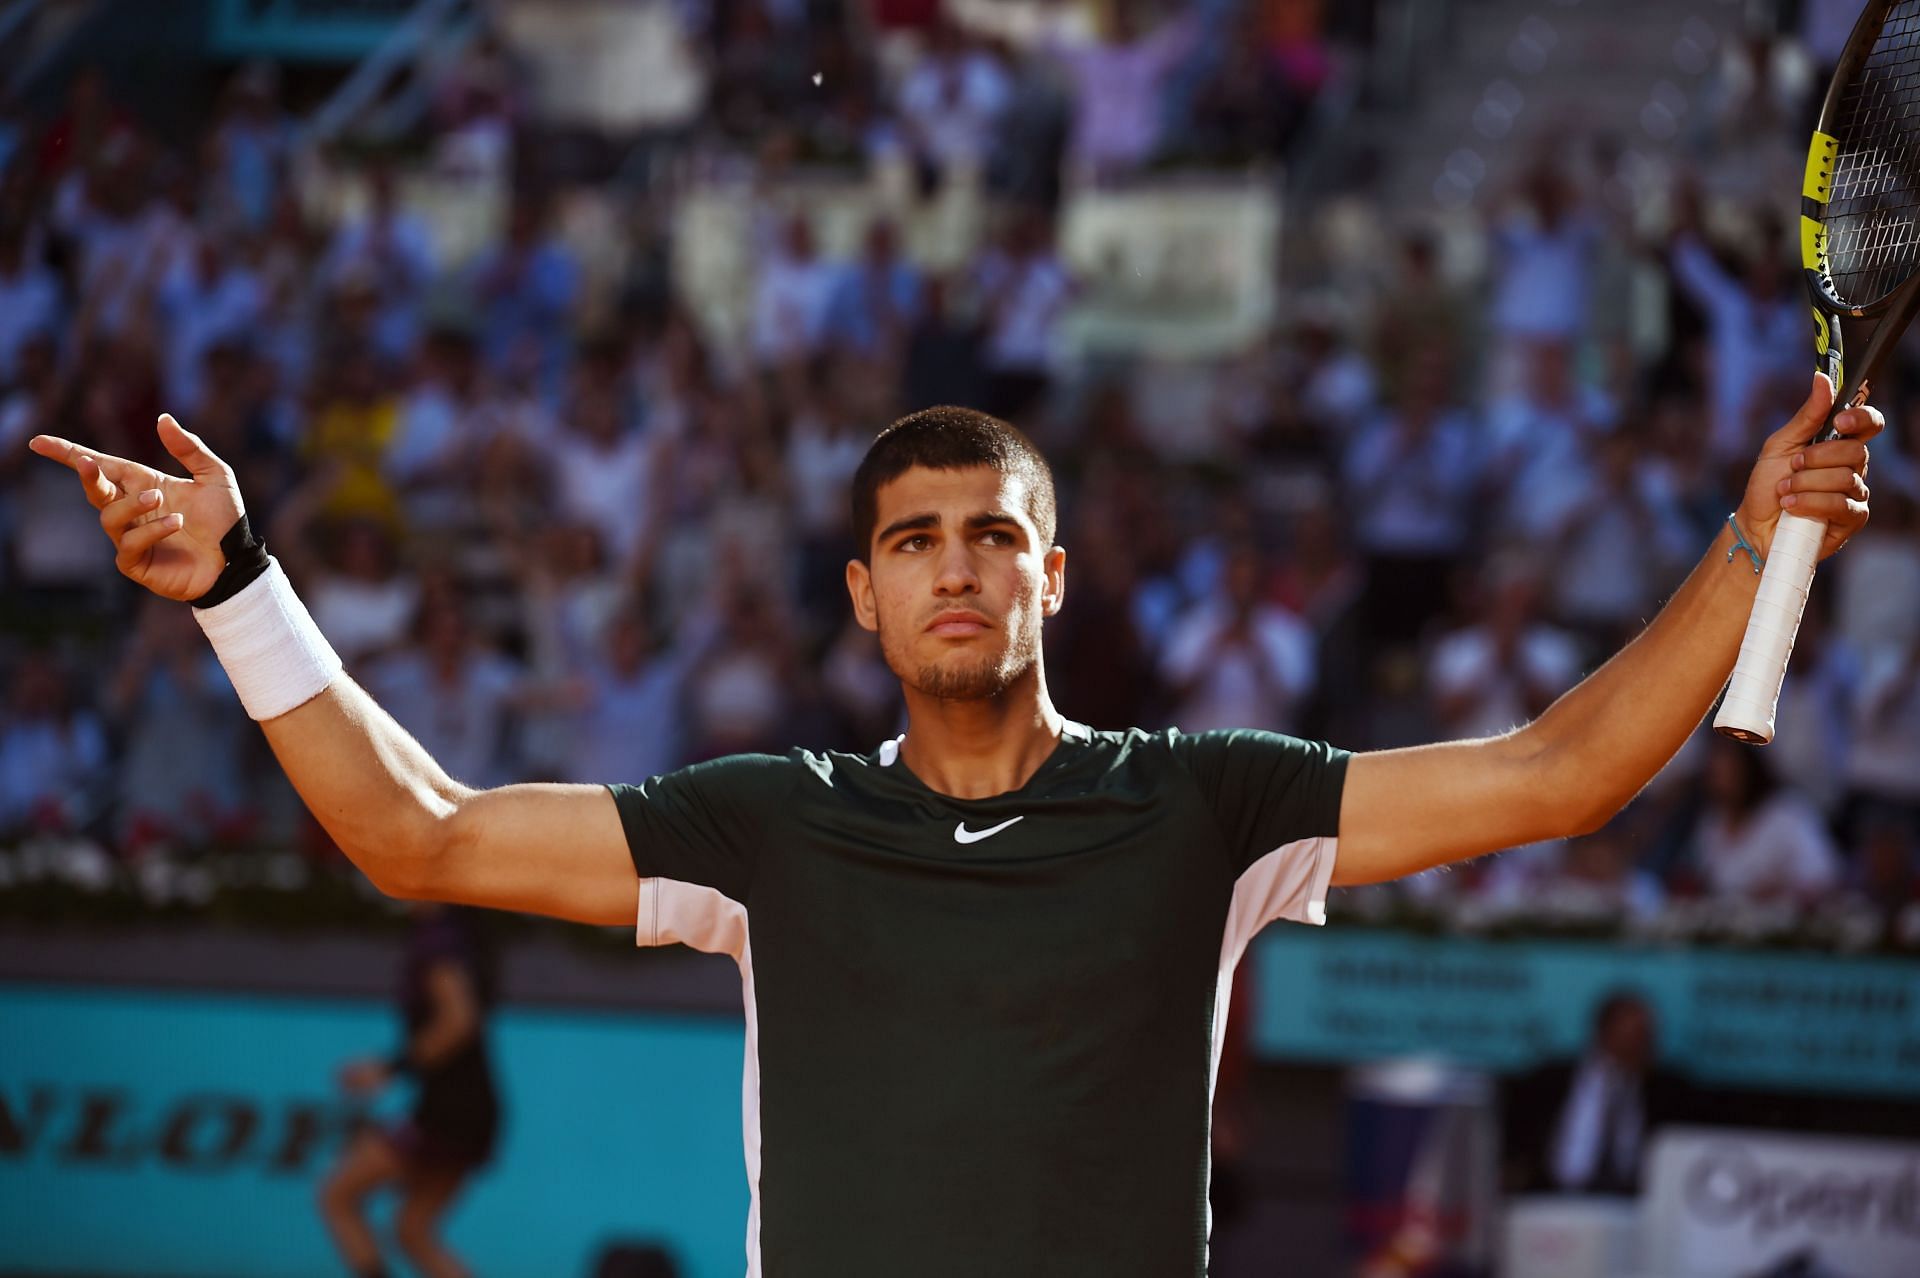 Carlos Alcaraz takes on Alexander Zverev in the final of the 2022 Madrid Open